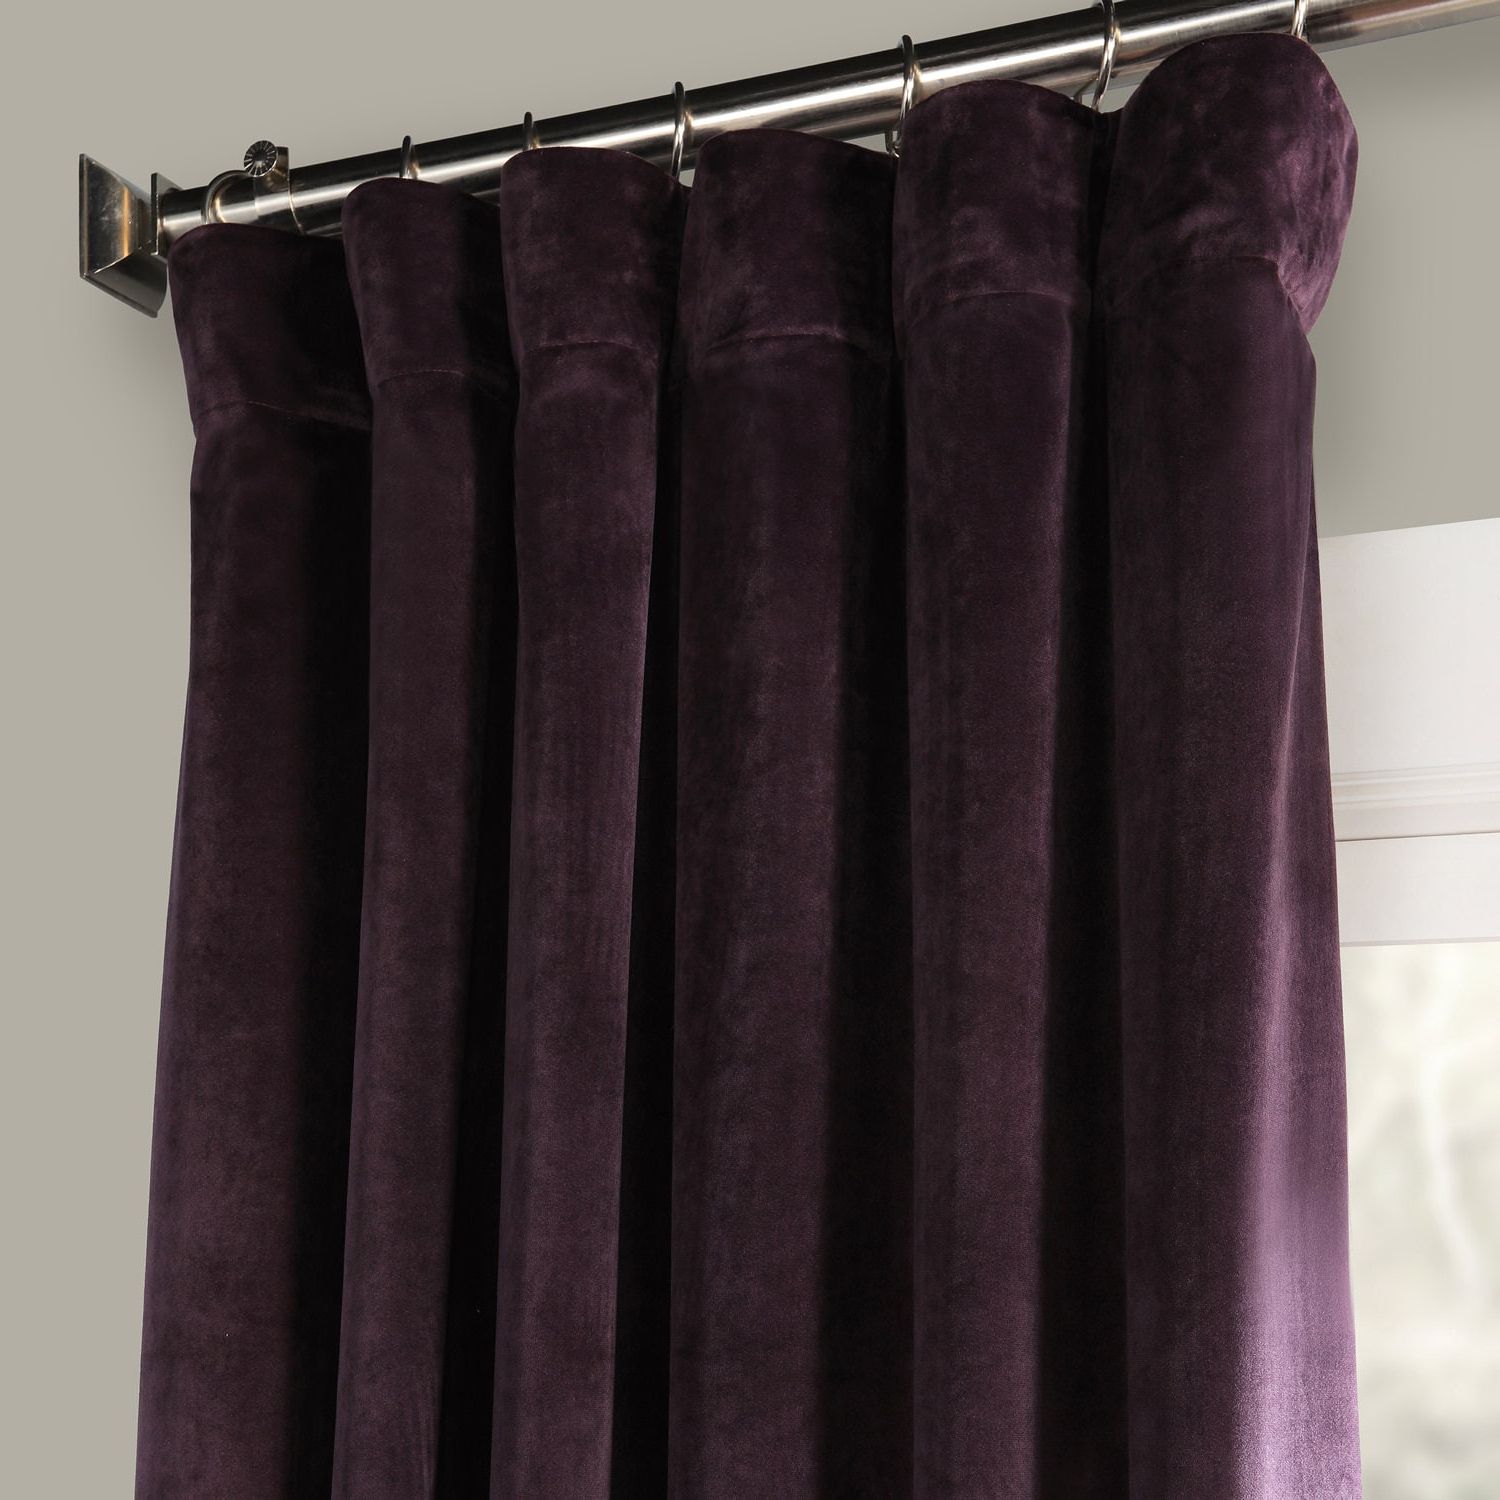 Current Heritage Plush Velvet Curtains With Regard To Omega Purple Heritage Plush Velvet Curtain (View 12 of 20)